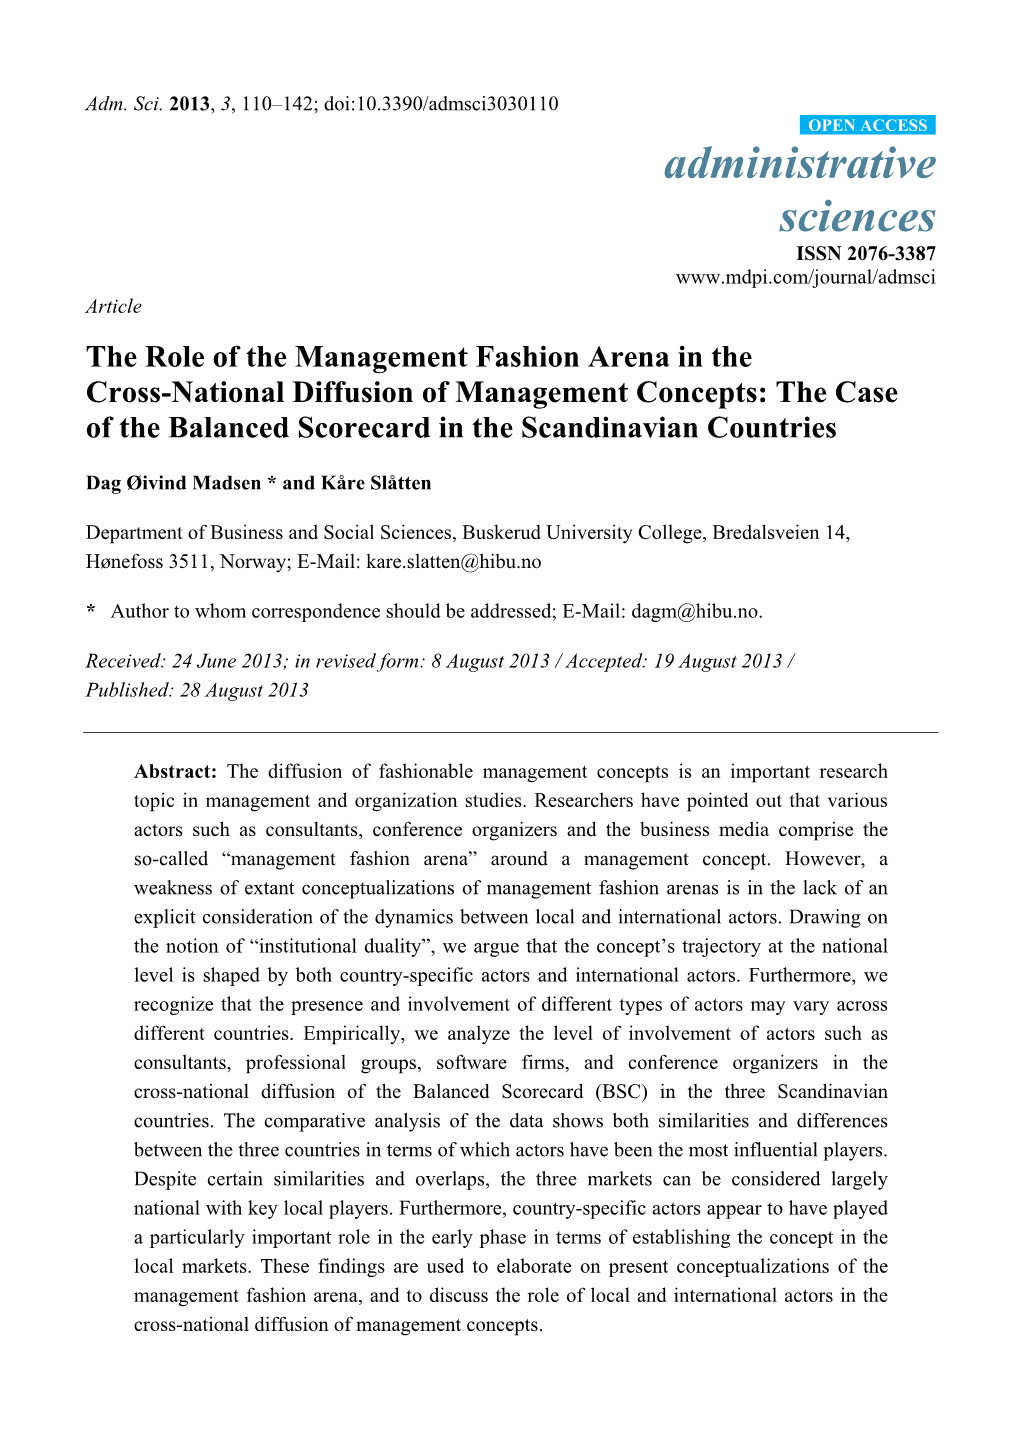 The Role of the Management Fashion Arena in the Cross-National Diffusion of Management Concepts: the Case of the Balanced Scorecard in the Scandinavian Countries